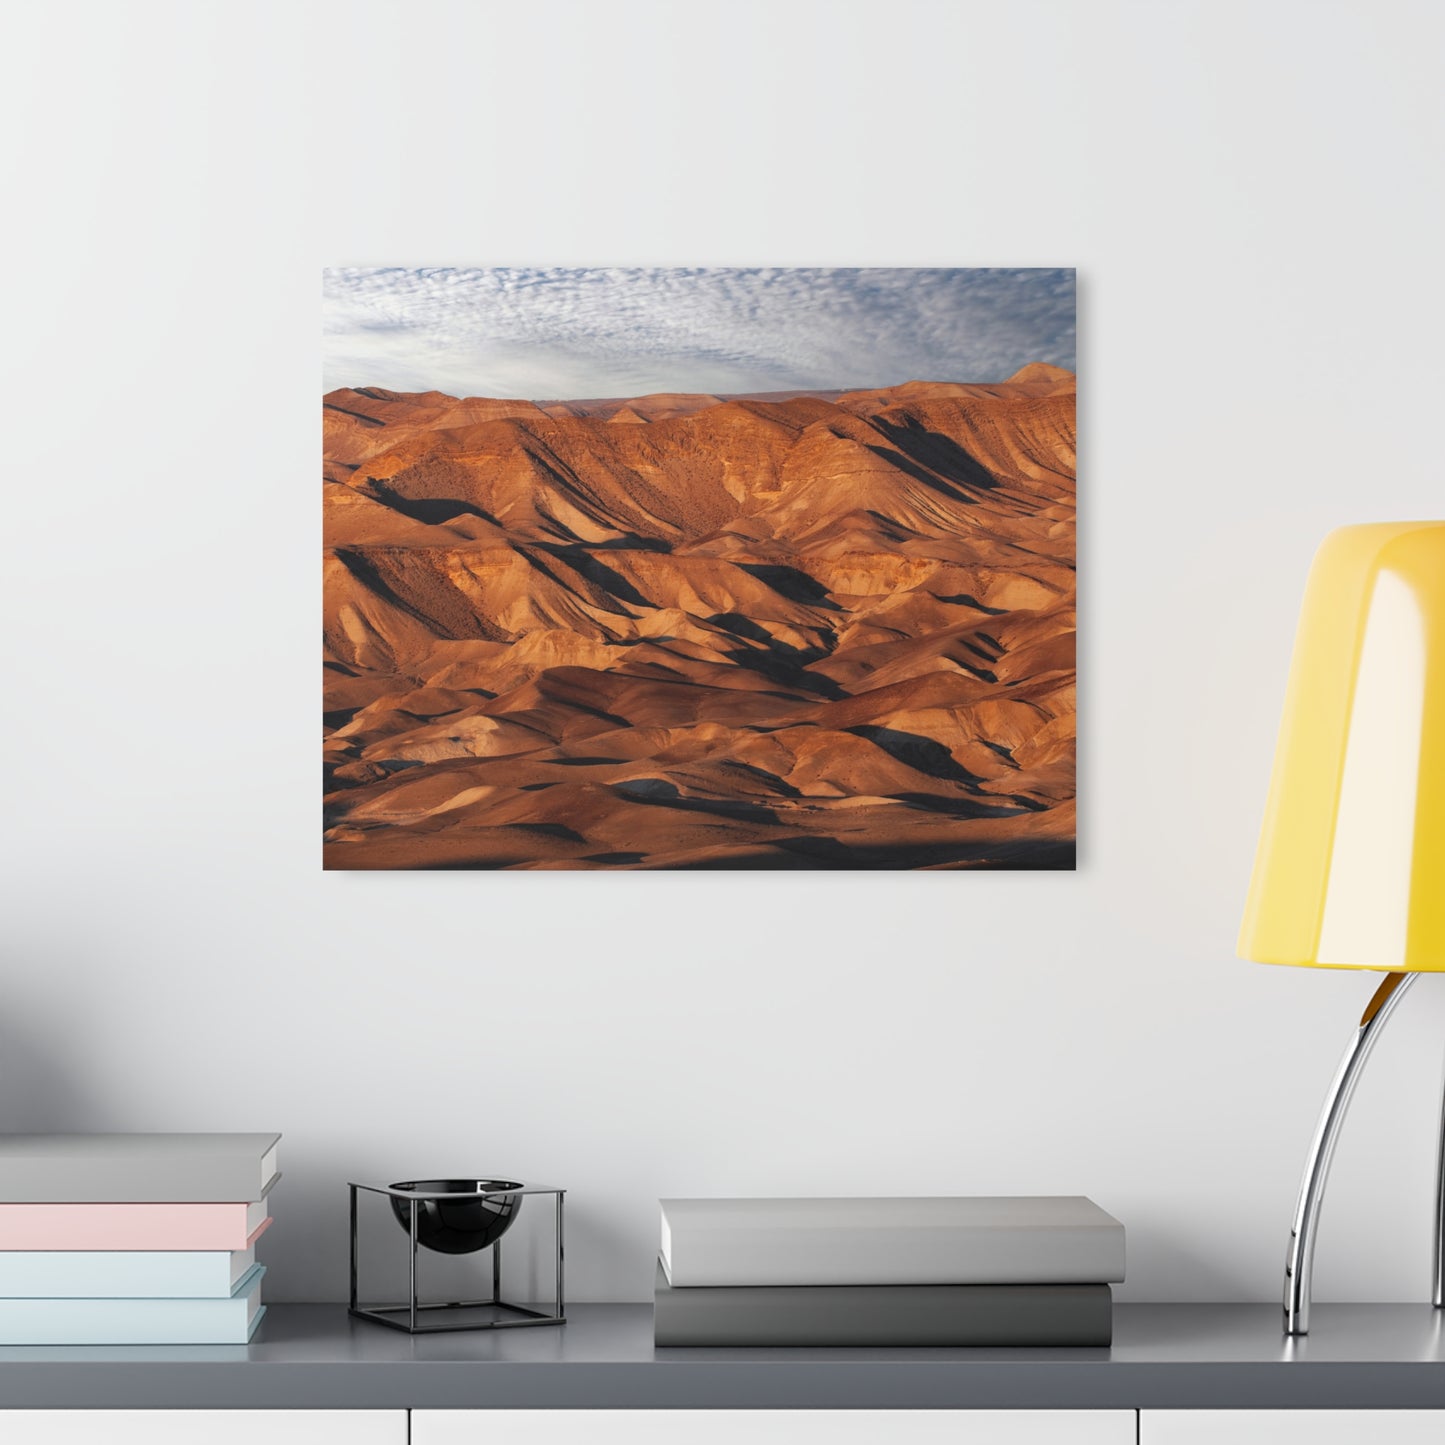 Judean Desert Sunrise by Yehoshua Halevi Photograph - Glossy Acrylic Print (French Cleat Hanging)